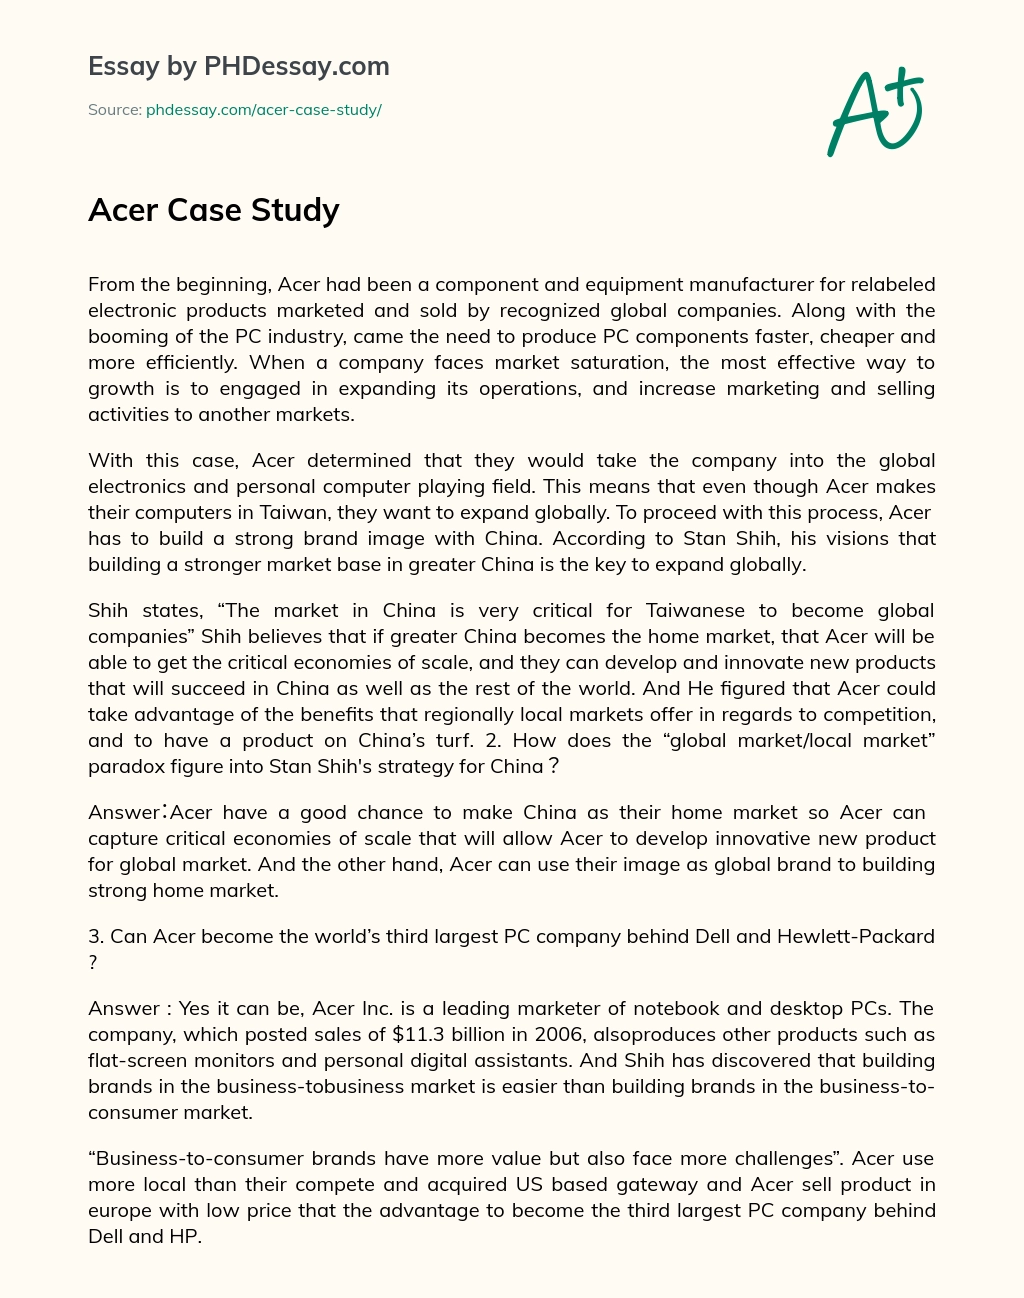 Acer’s Expansion Strategy: Building a Strong Brand Image in China for Global Growth essay